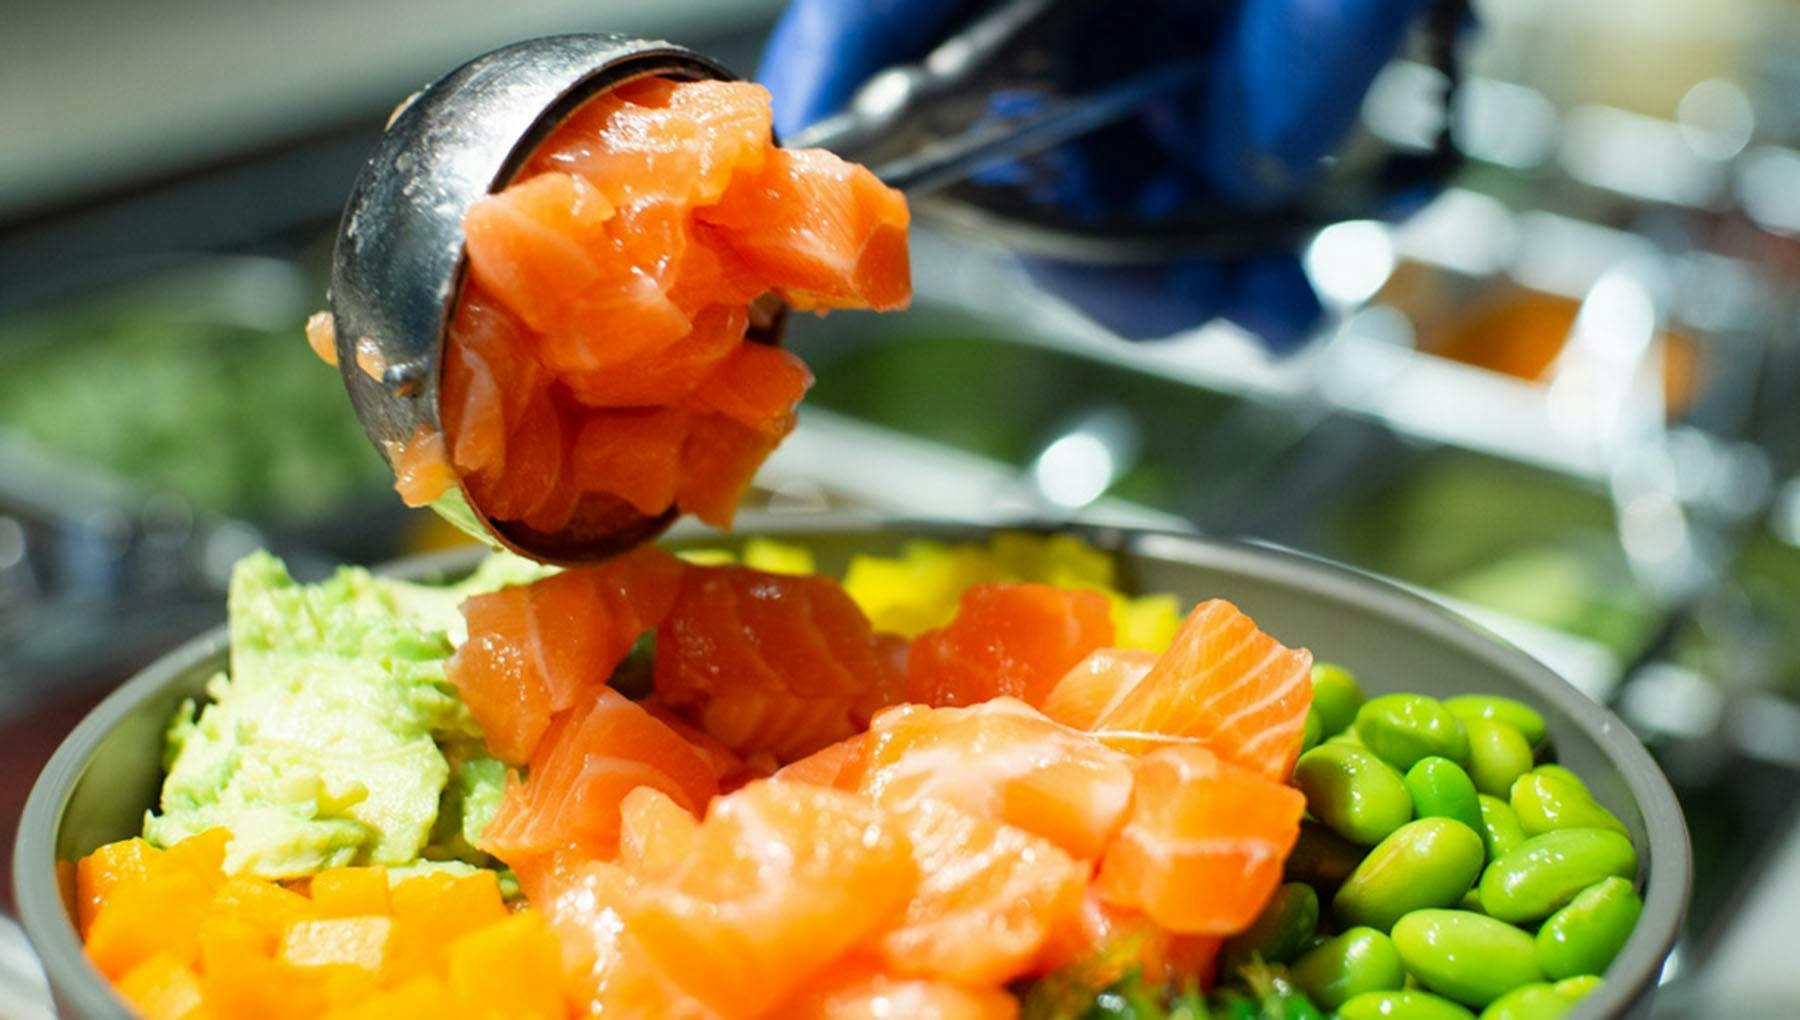 A gloved hand scooping pieces of salmon onto some vegetables.